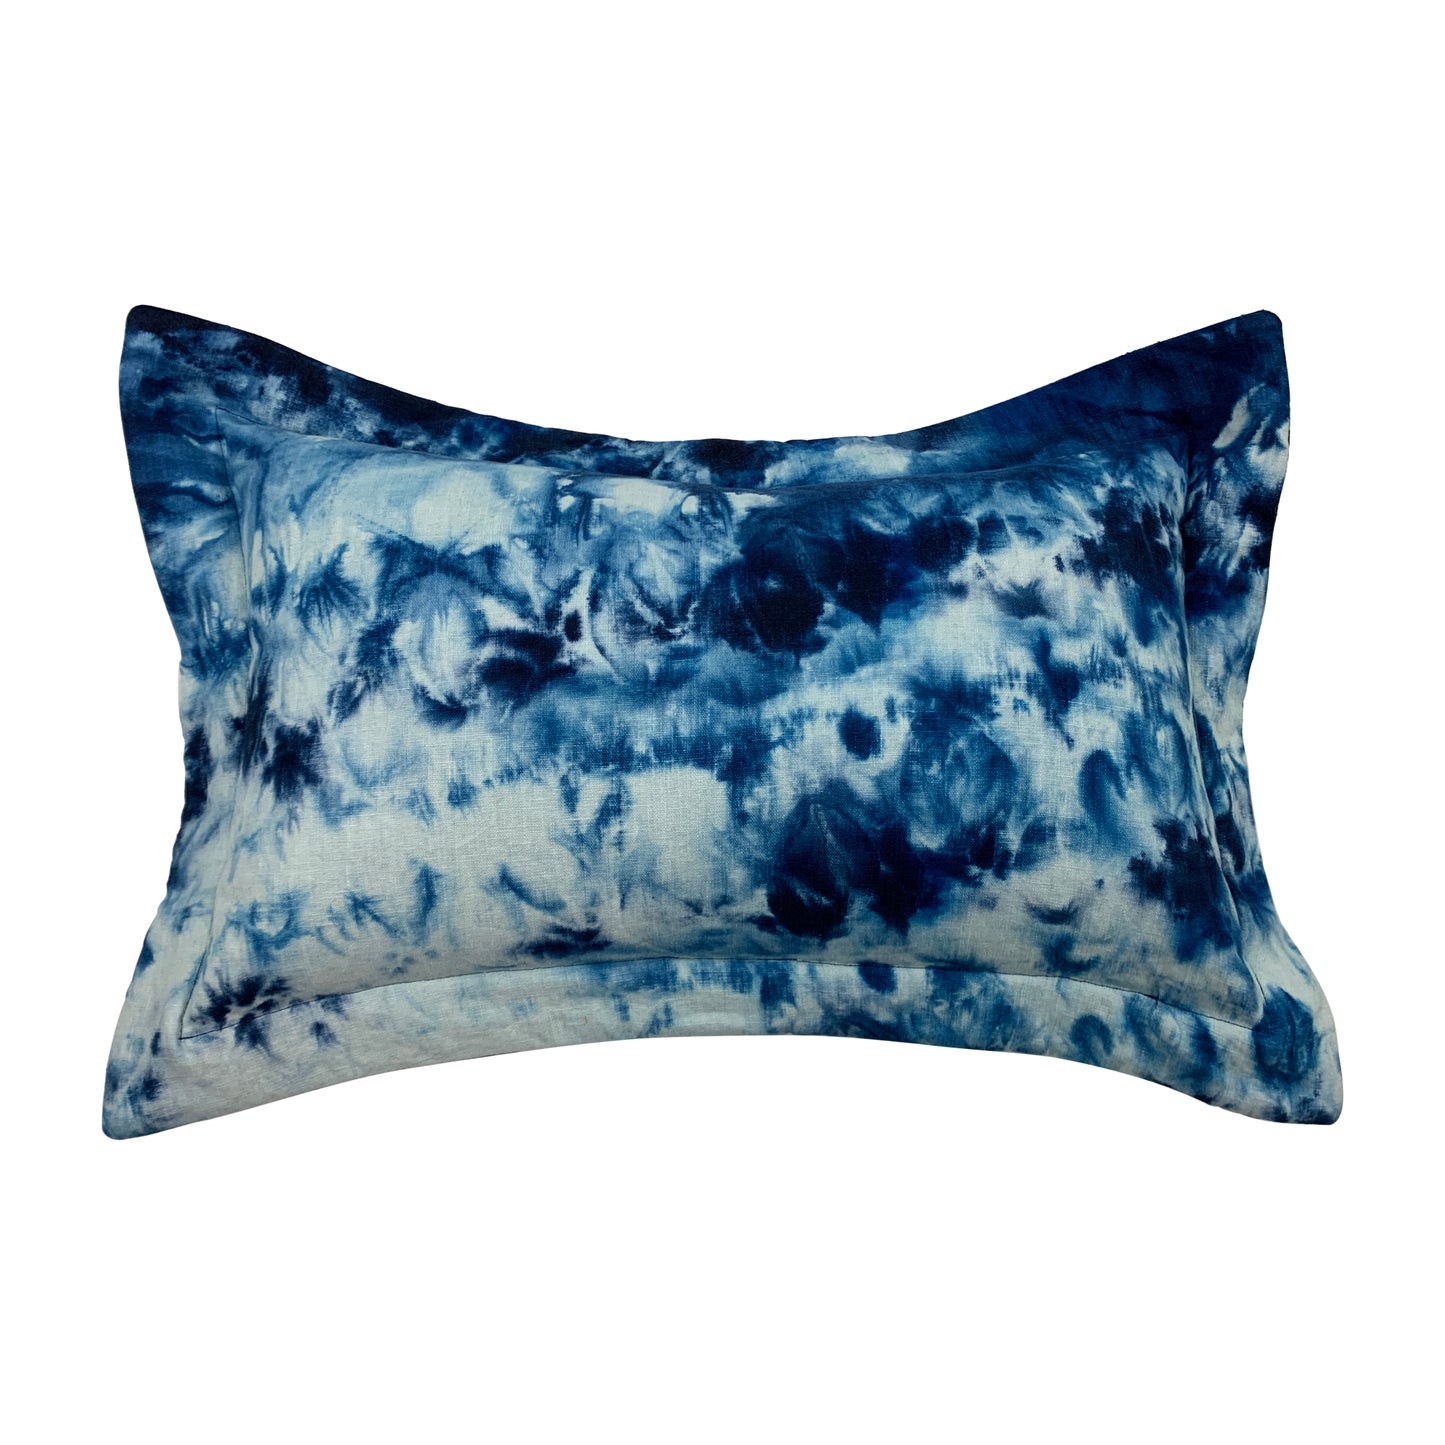 Art Pillow: Blue Stained Glass